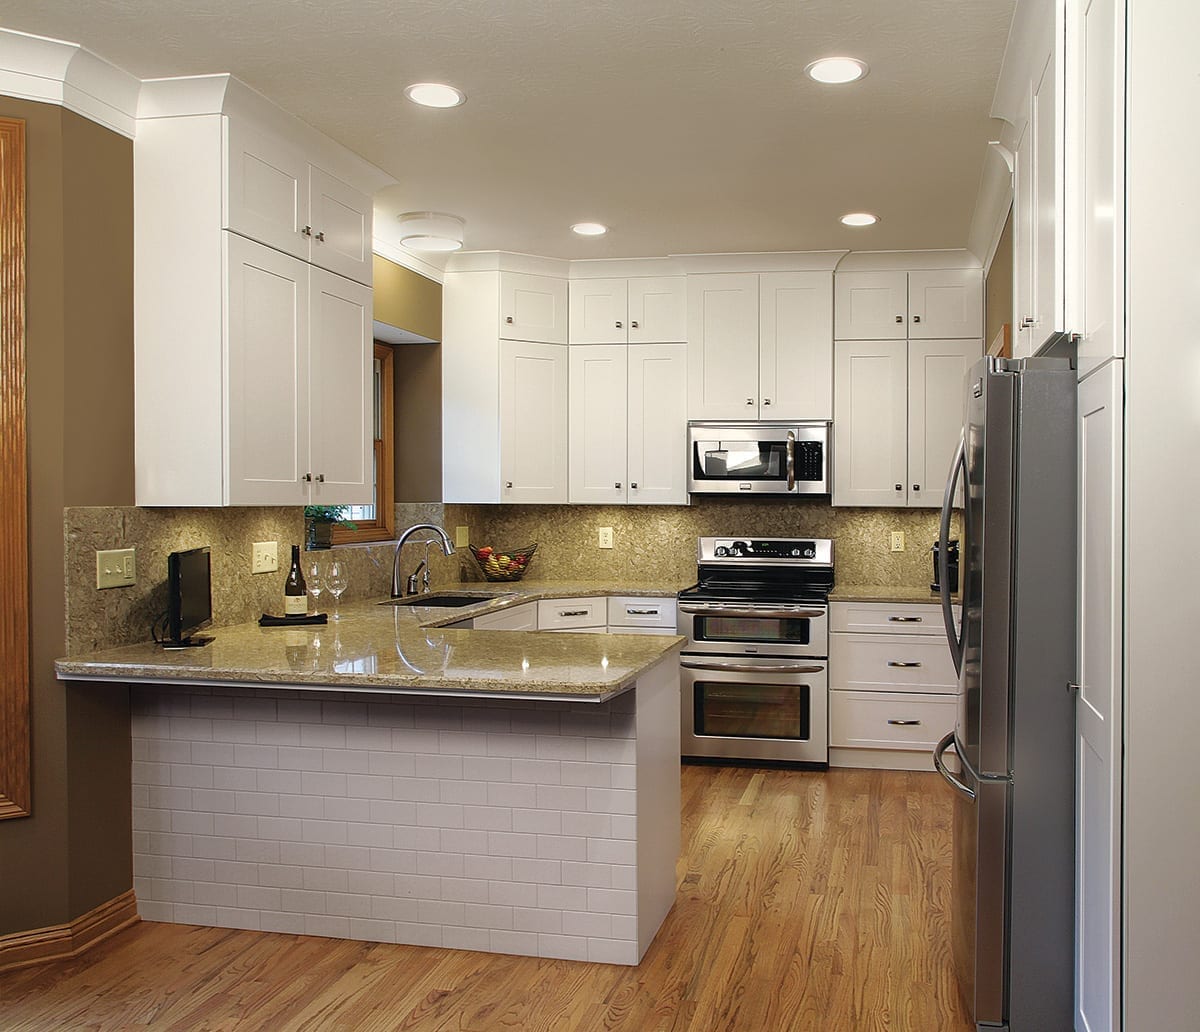 picture of a kitchen After refacing in a brown hue and installed gorgeous cabinets that extend to the ceiling, and perfect placement of the appliances 2